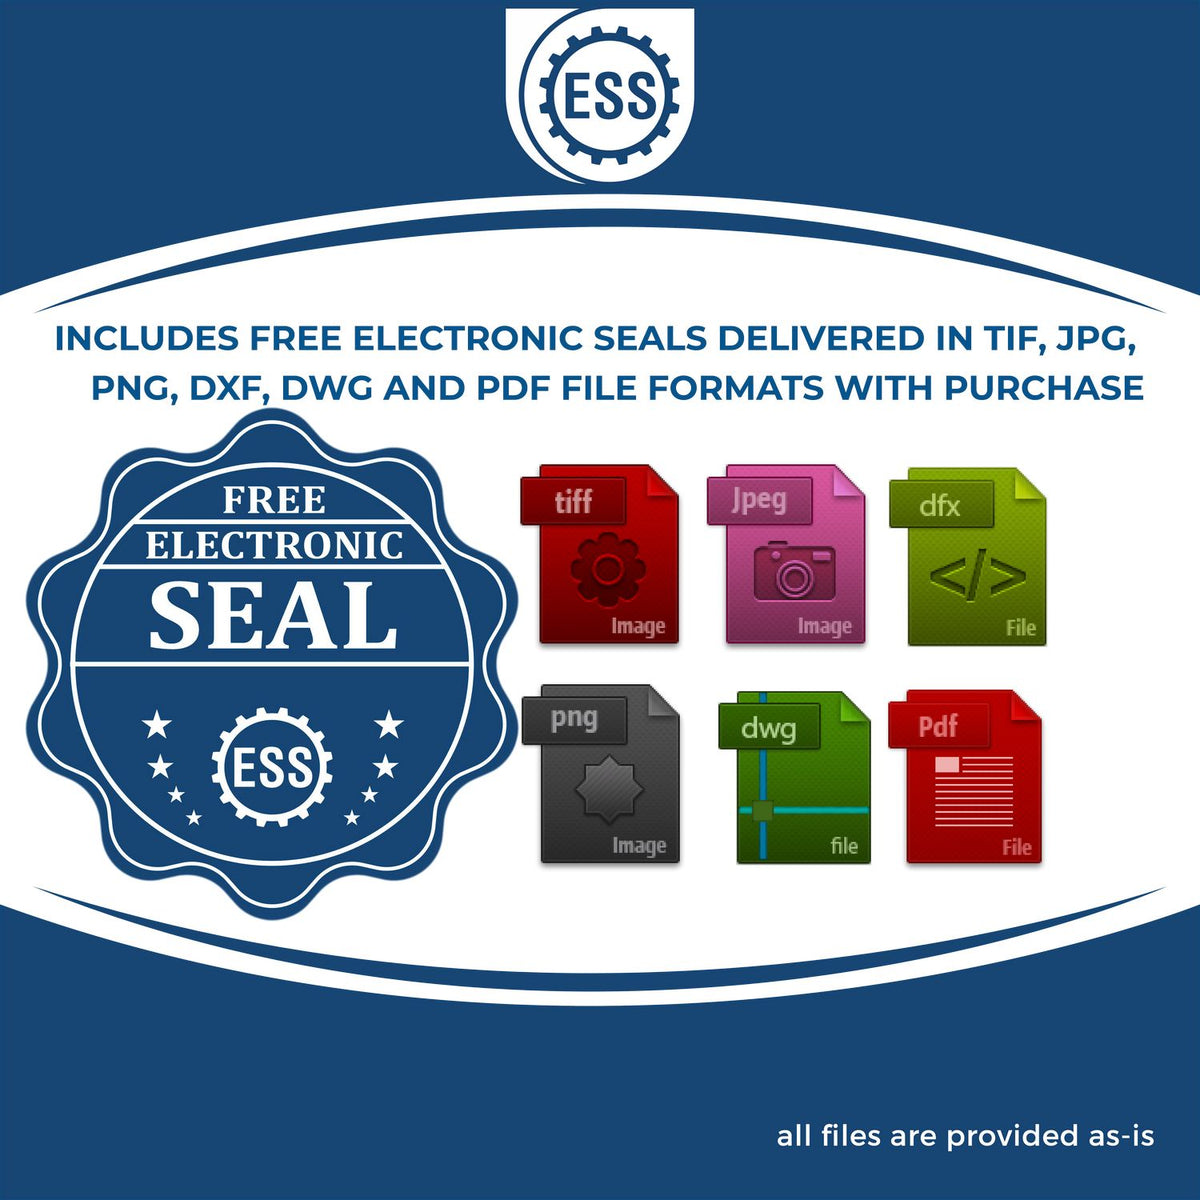 An infographic for the free electronic seal for the Slim Pre-Inked Tennessee Architect Seal Stamp illustrating the different file type icons such as DXF, DWG, TIF, JPG and PNG.